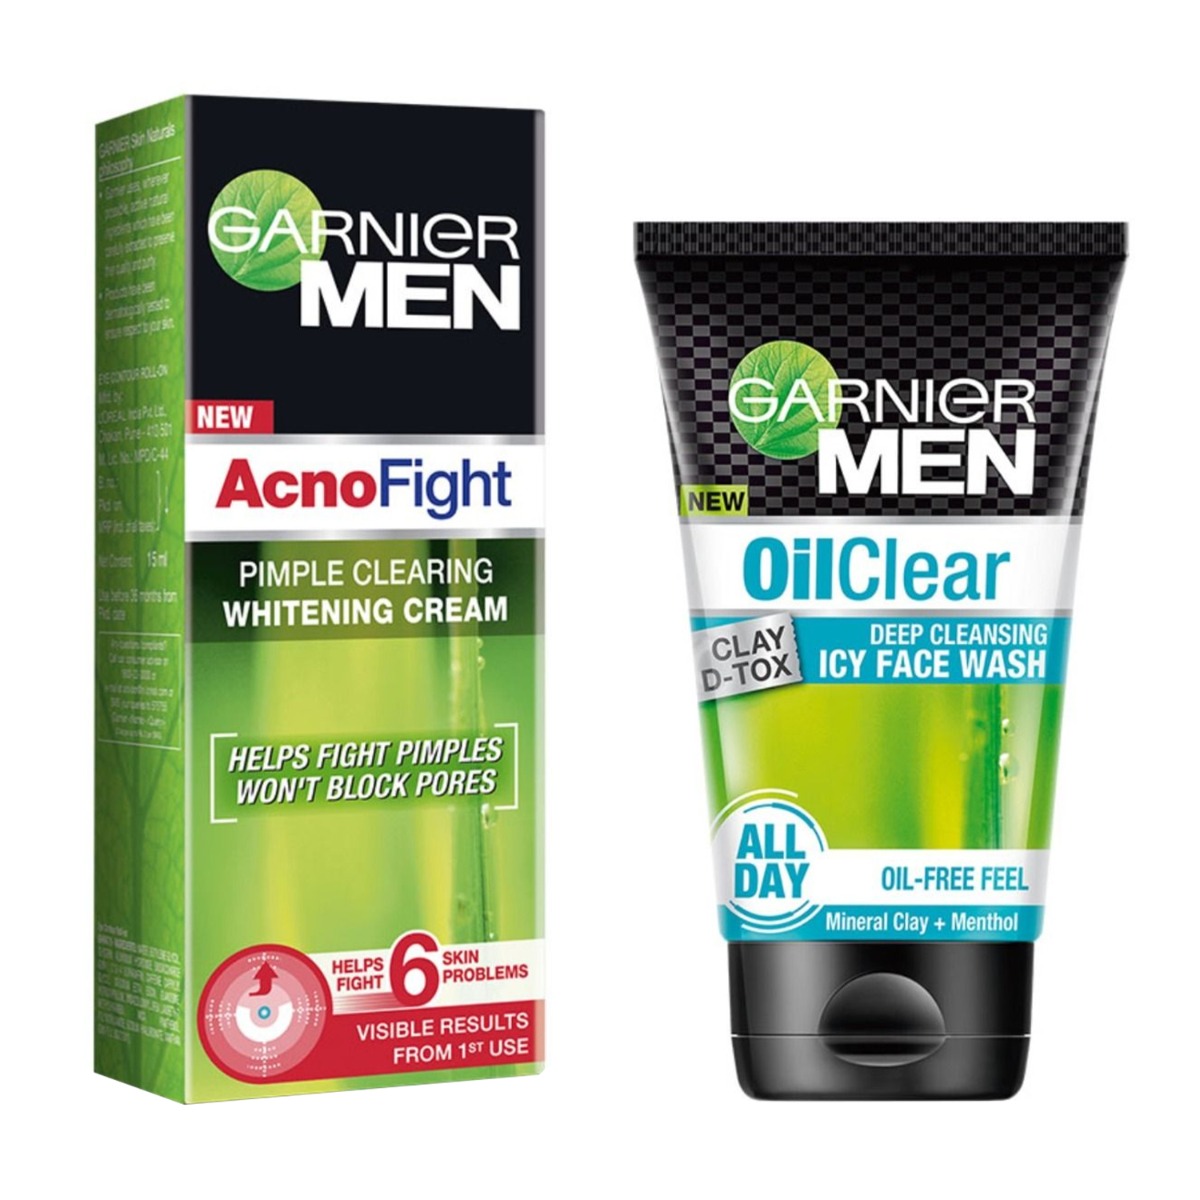 Garnier Men Acno Fight Pimple Clearing Whitening Day Cream, 45gm & Oil Clear Clay D-Tox Deep Cleansing Icy Face Wash, 100gm